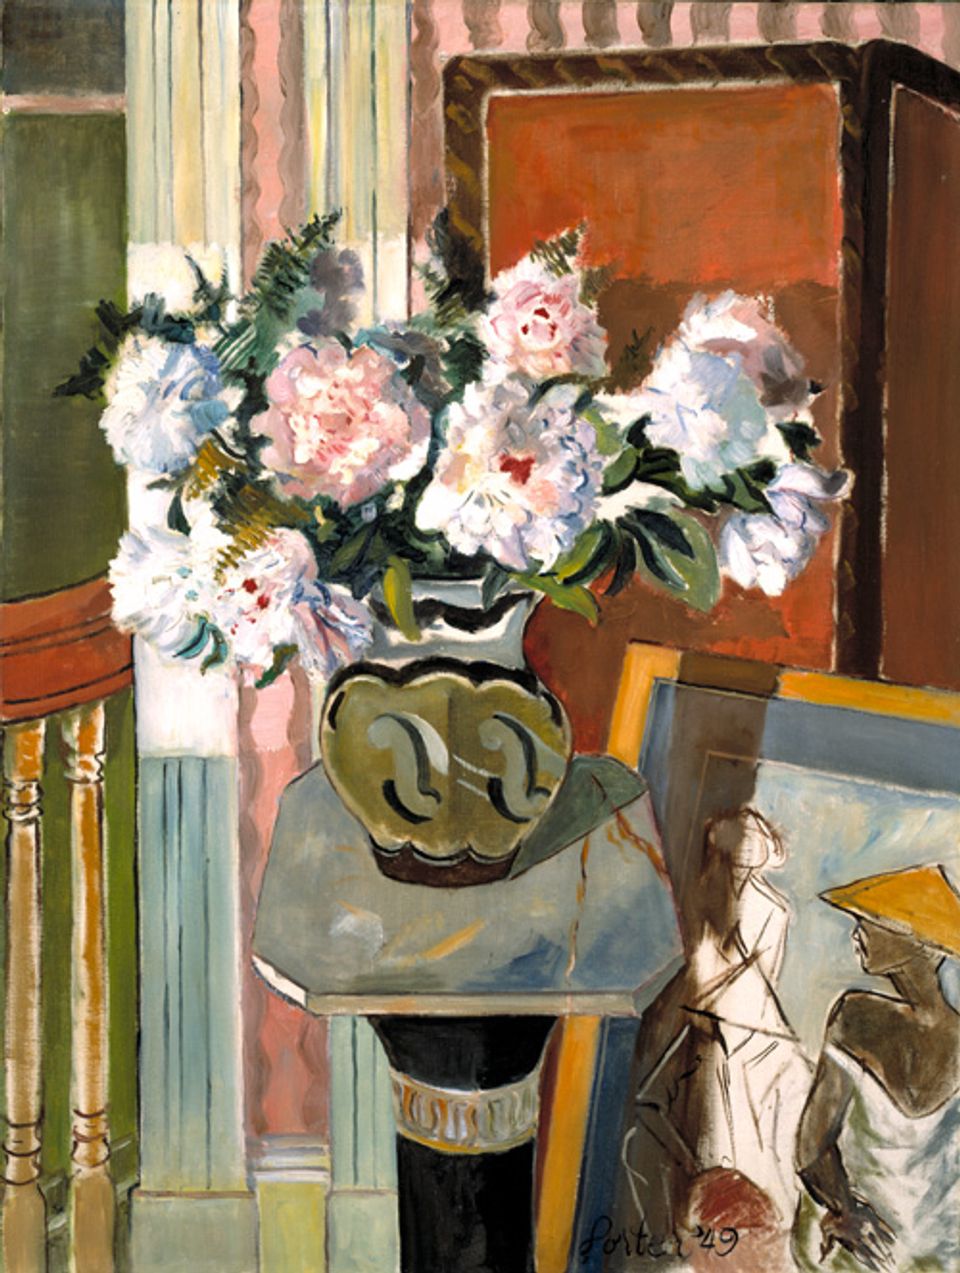 Porter's oil on canvas of a small table with a vase of flowers.